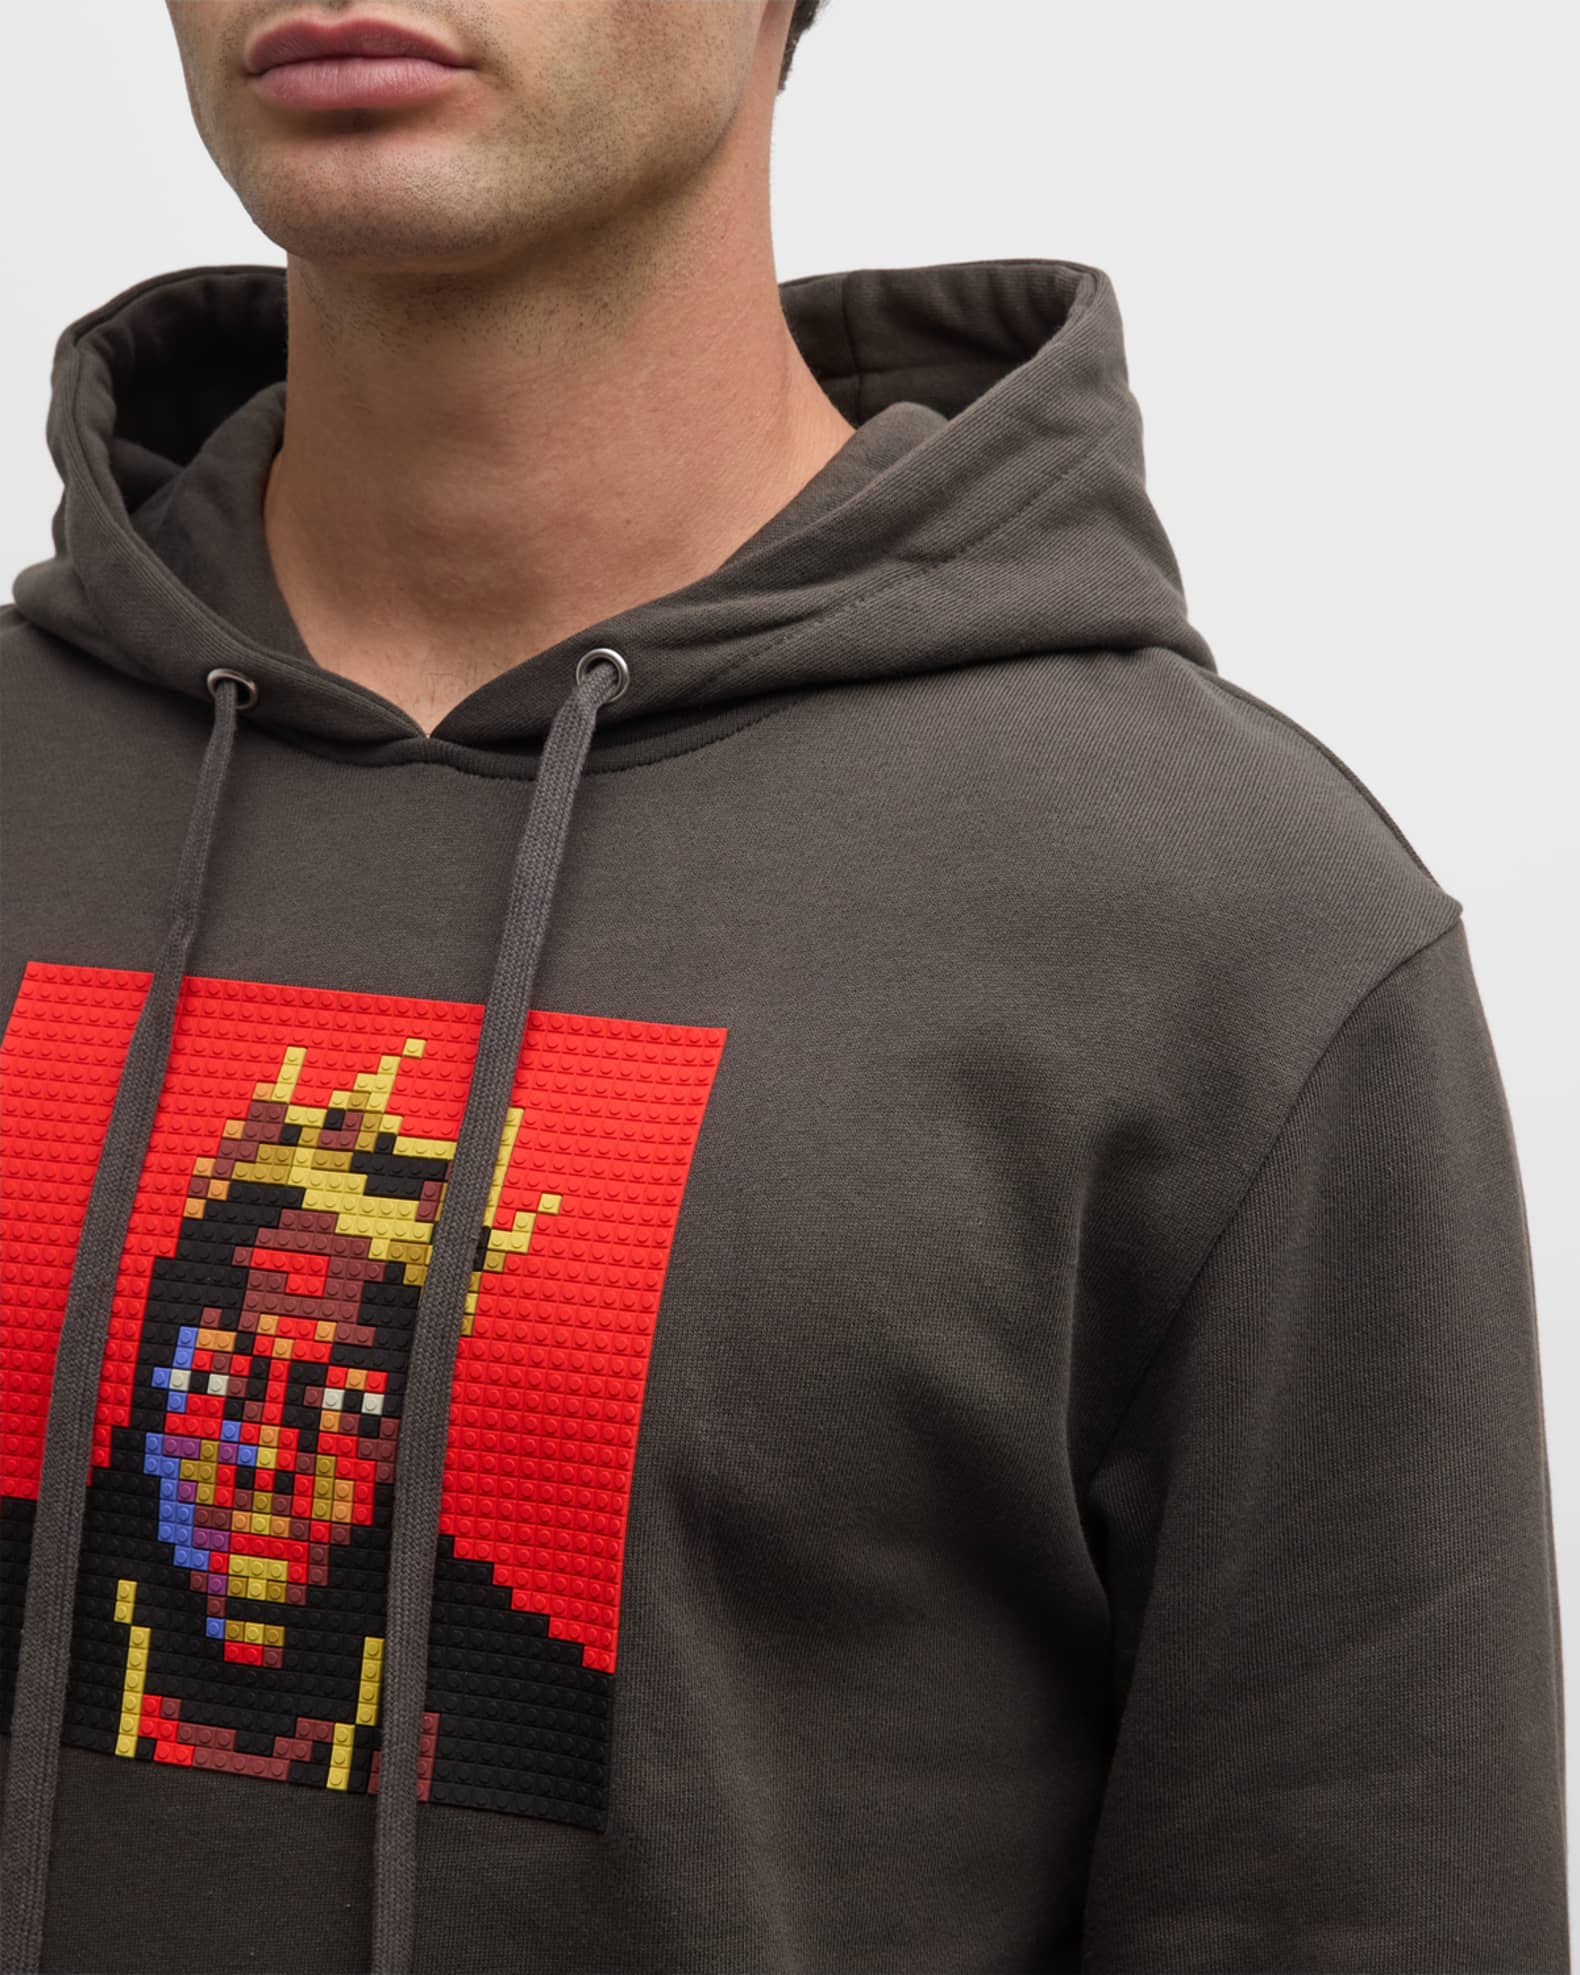 Shop Mostly Heard Rarely Seen 8-Bit Oger Pixelated Graphic Cotton Hoodie